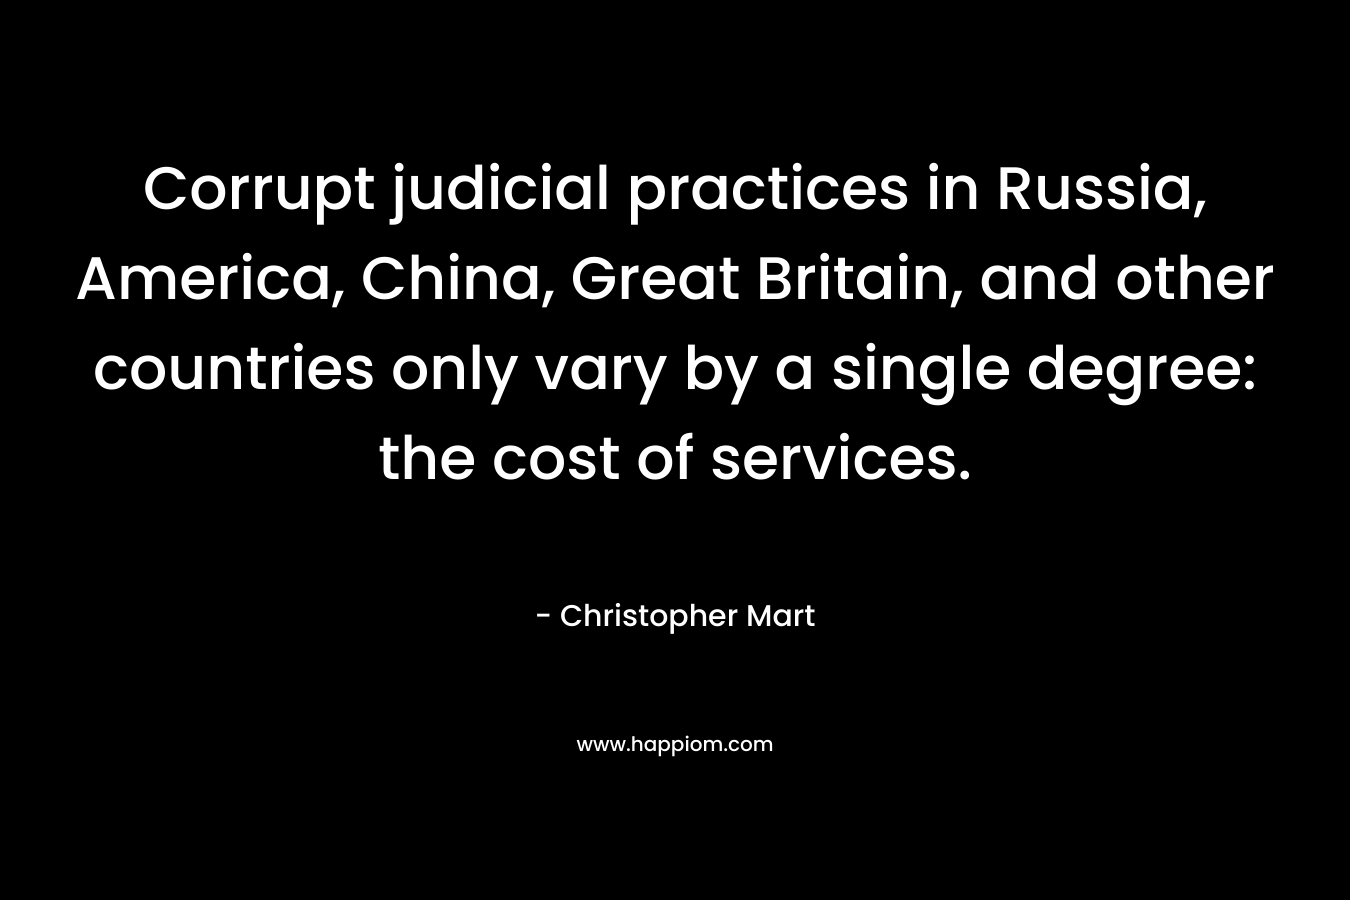 Corrupt judicial practices in Russia, America, China, Great Britain, and other countries only vary by a single degree: the cost of services. – Christopher Mart